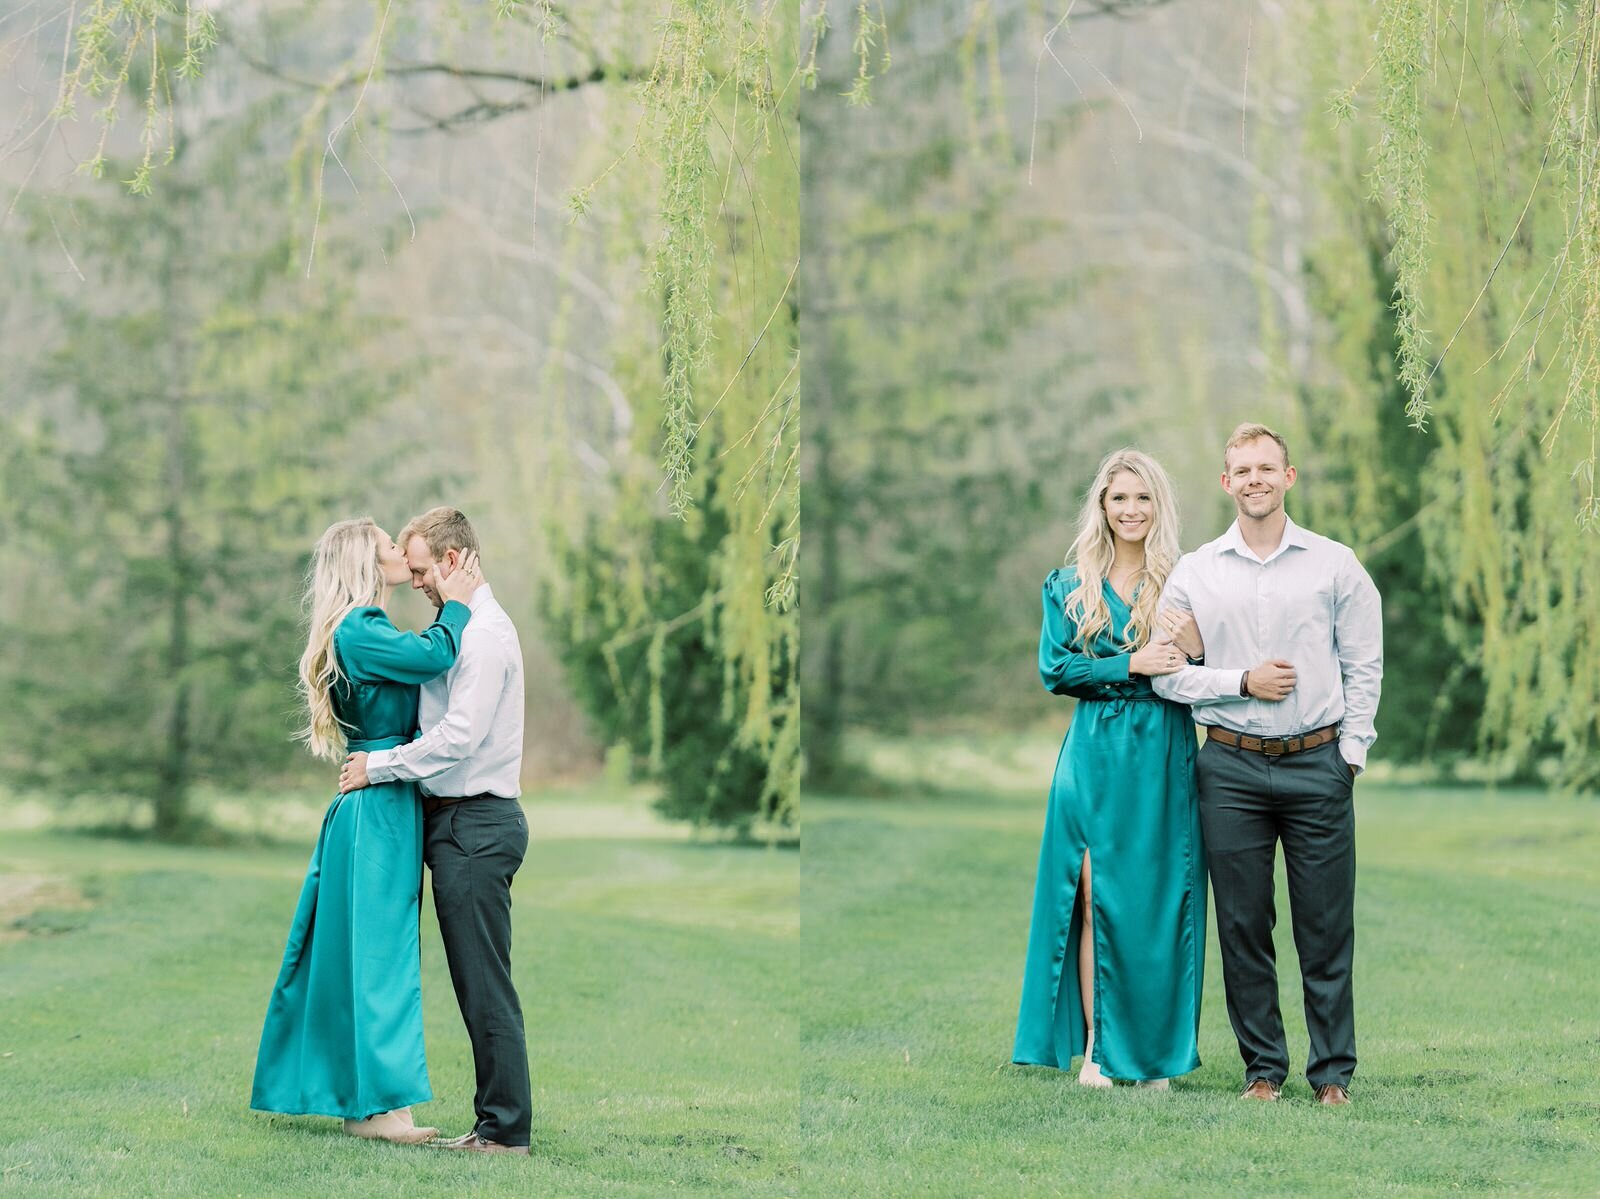  Future bride and groom stand together and pose for outdoor engagement photos at a local park in westmoreland county 